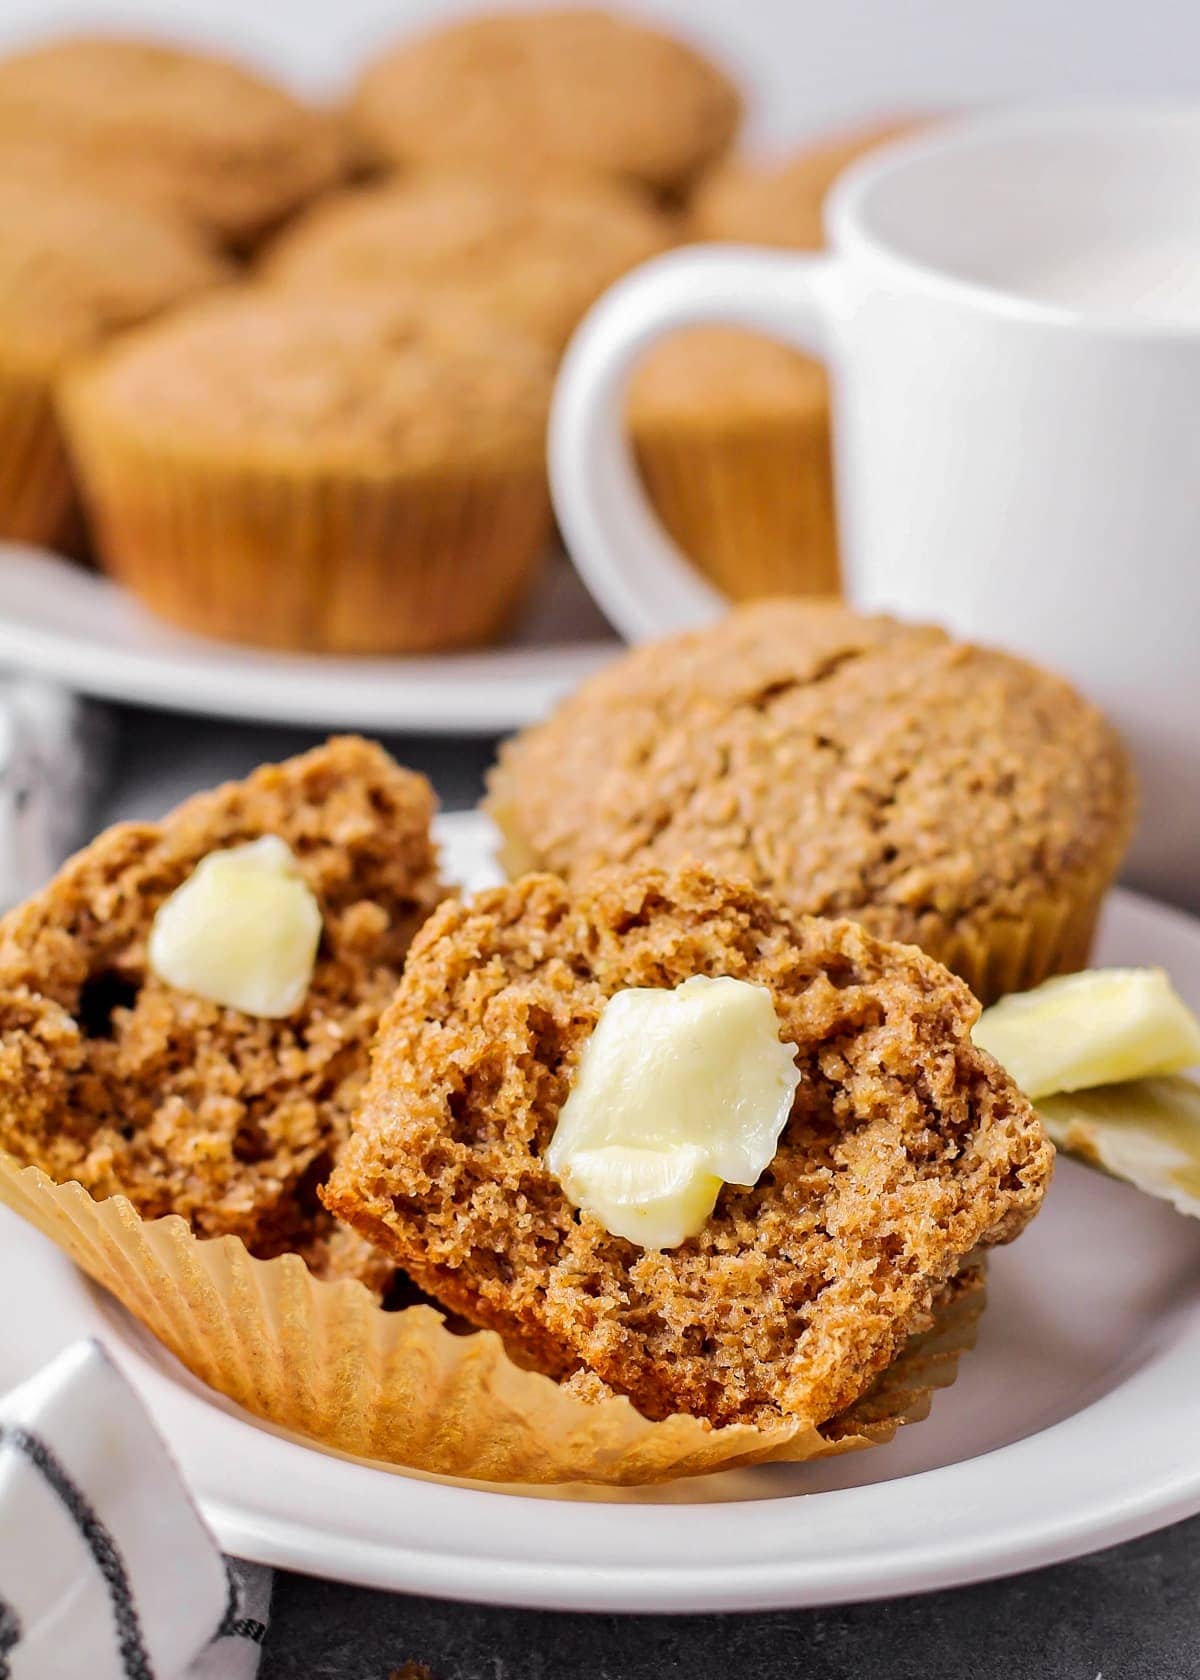 A bran muffin split in half and topped with butter.